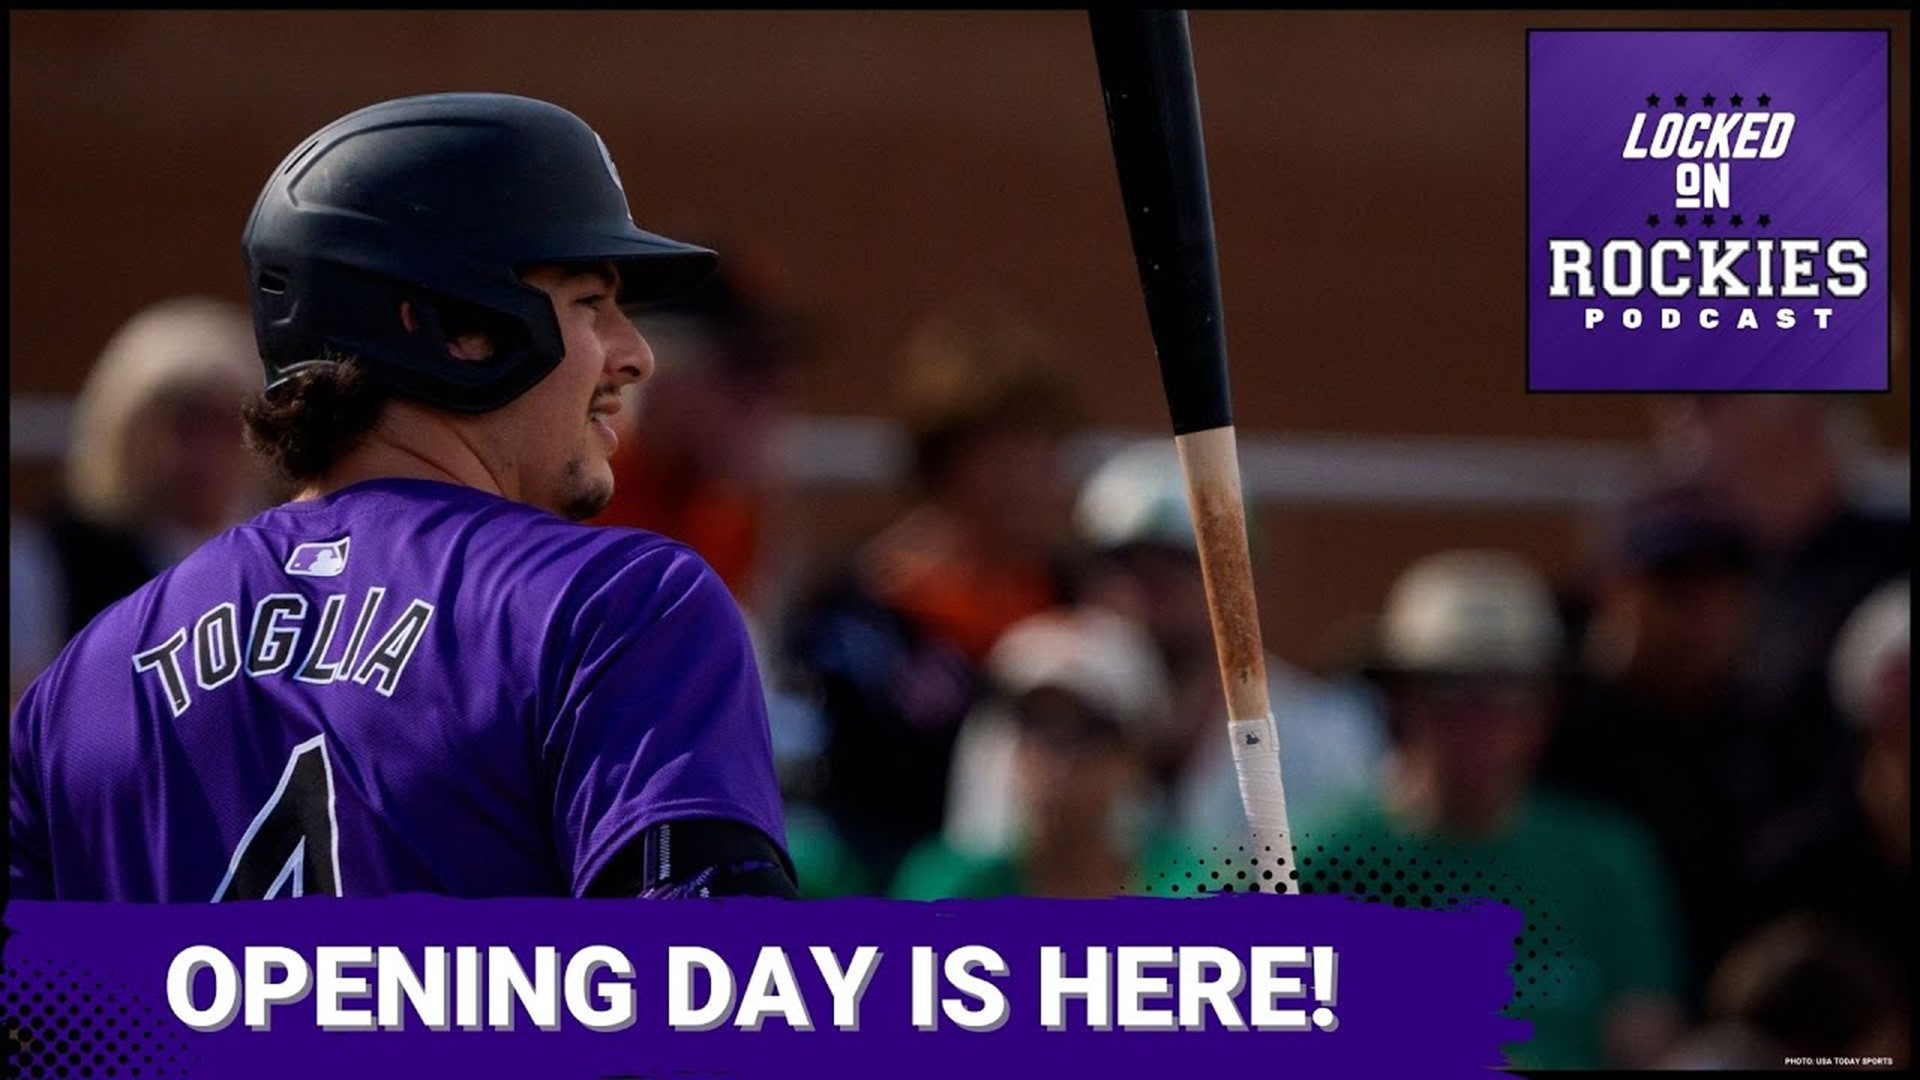 Anything is possible on Opening Day. For now, the Rockies still have a shot, the opportunity to prove the doubters wrong is here